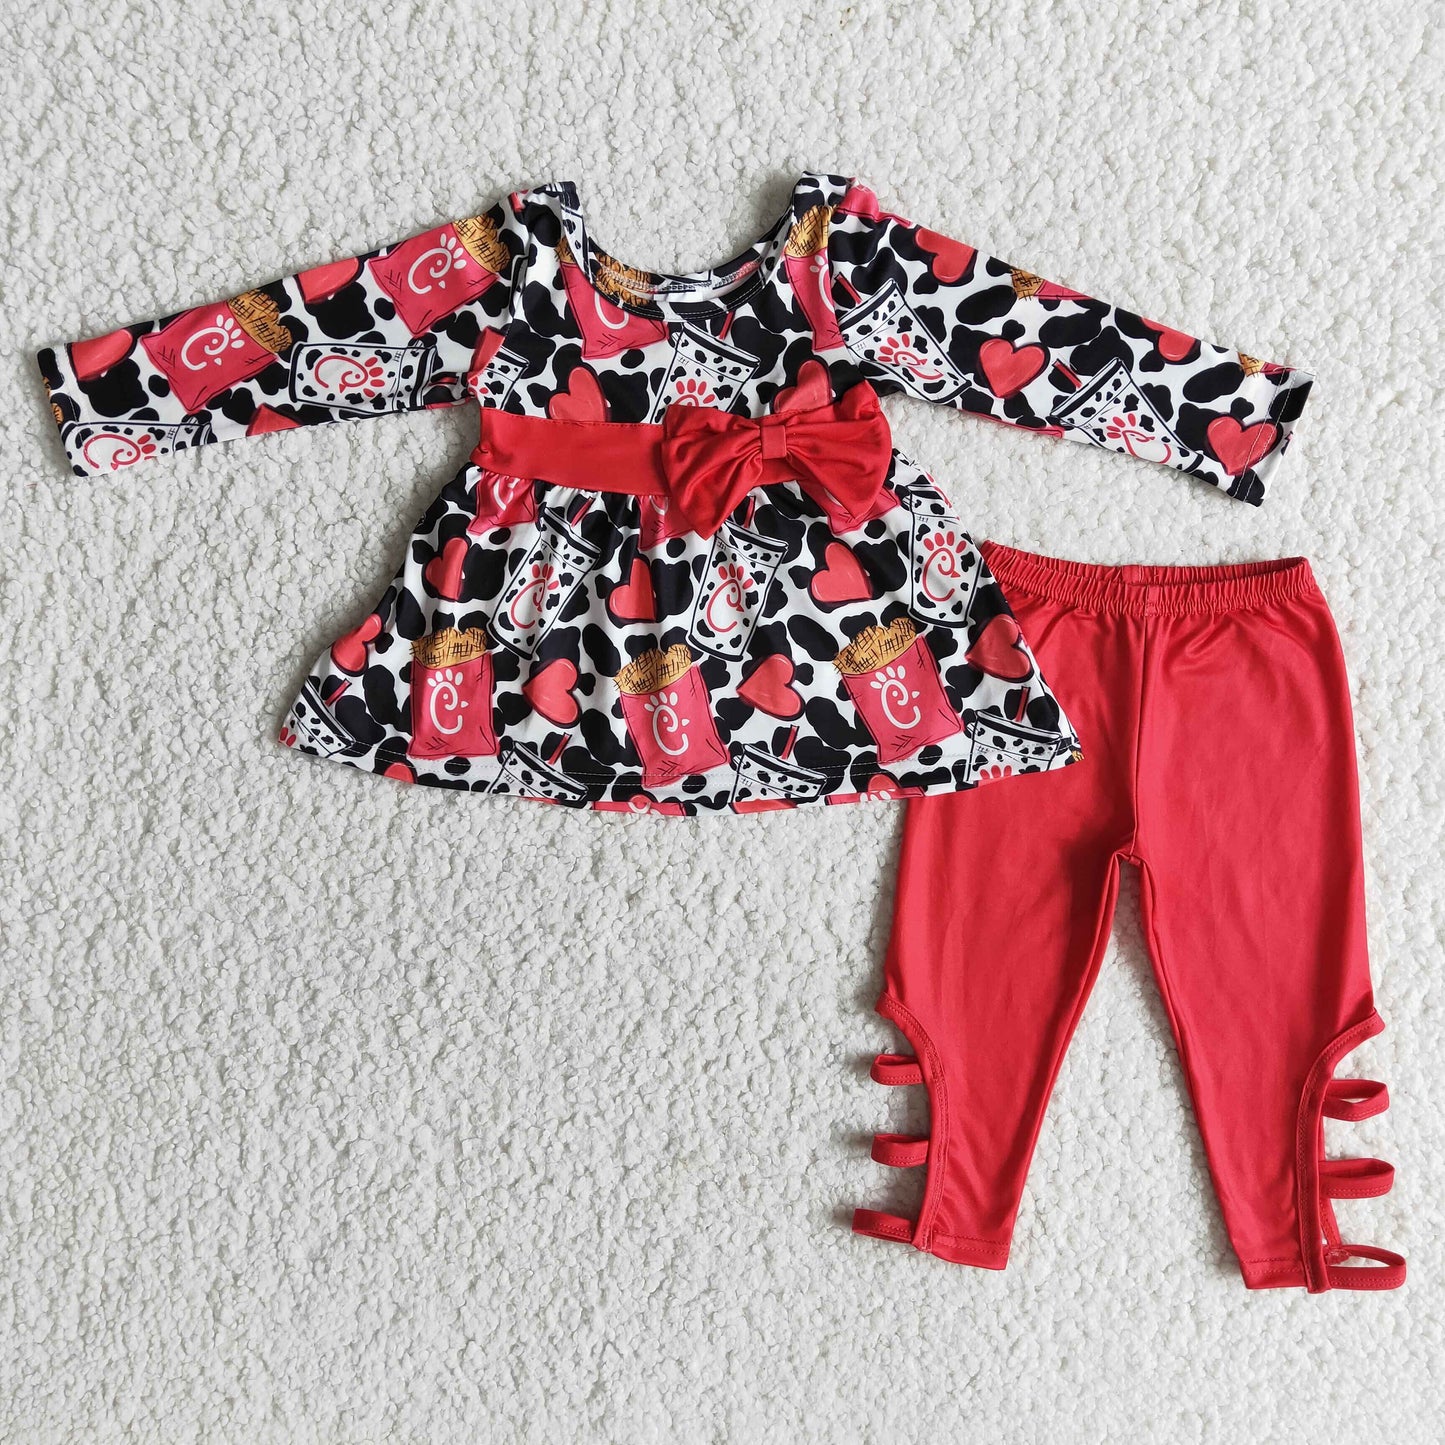 chick-fil-a red cross leggings outfit for valentine's day